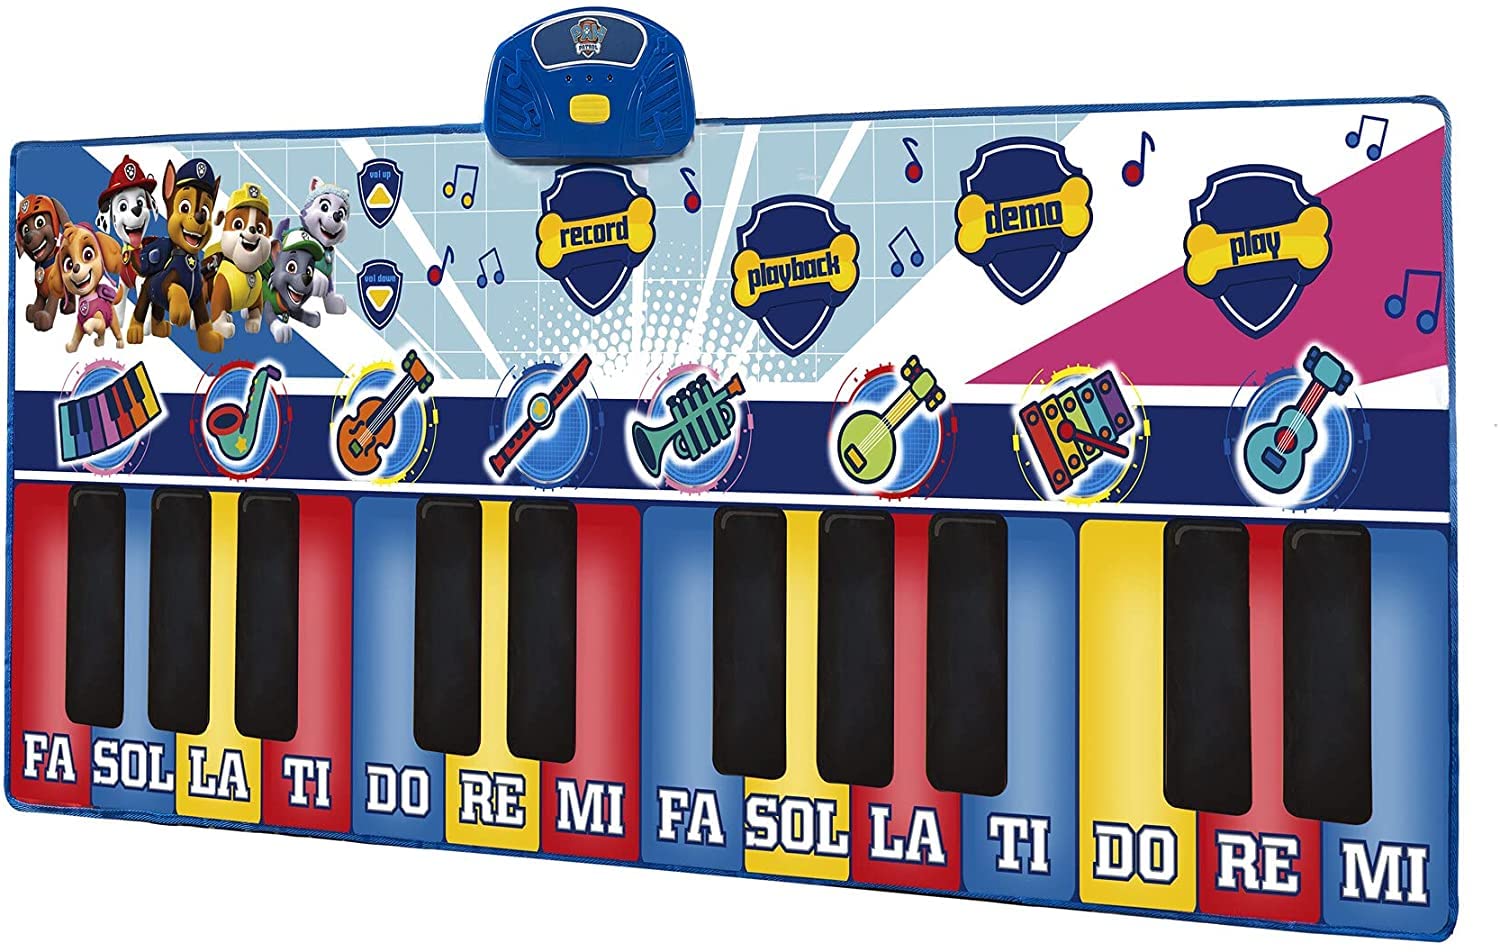 70" First Act Paw Patrol Giant Musical Piano Mat w/ 24 Keys, Record, Playback, & Volume Control $8.55 + Free Shipping w/ Prime or on $25+